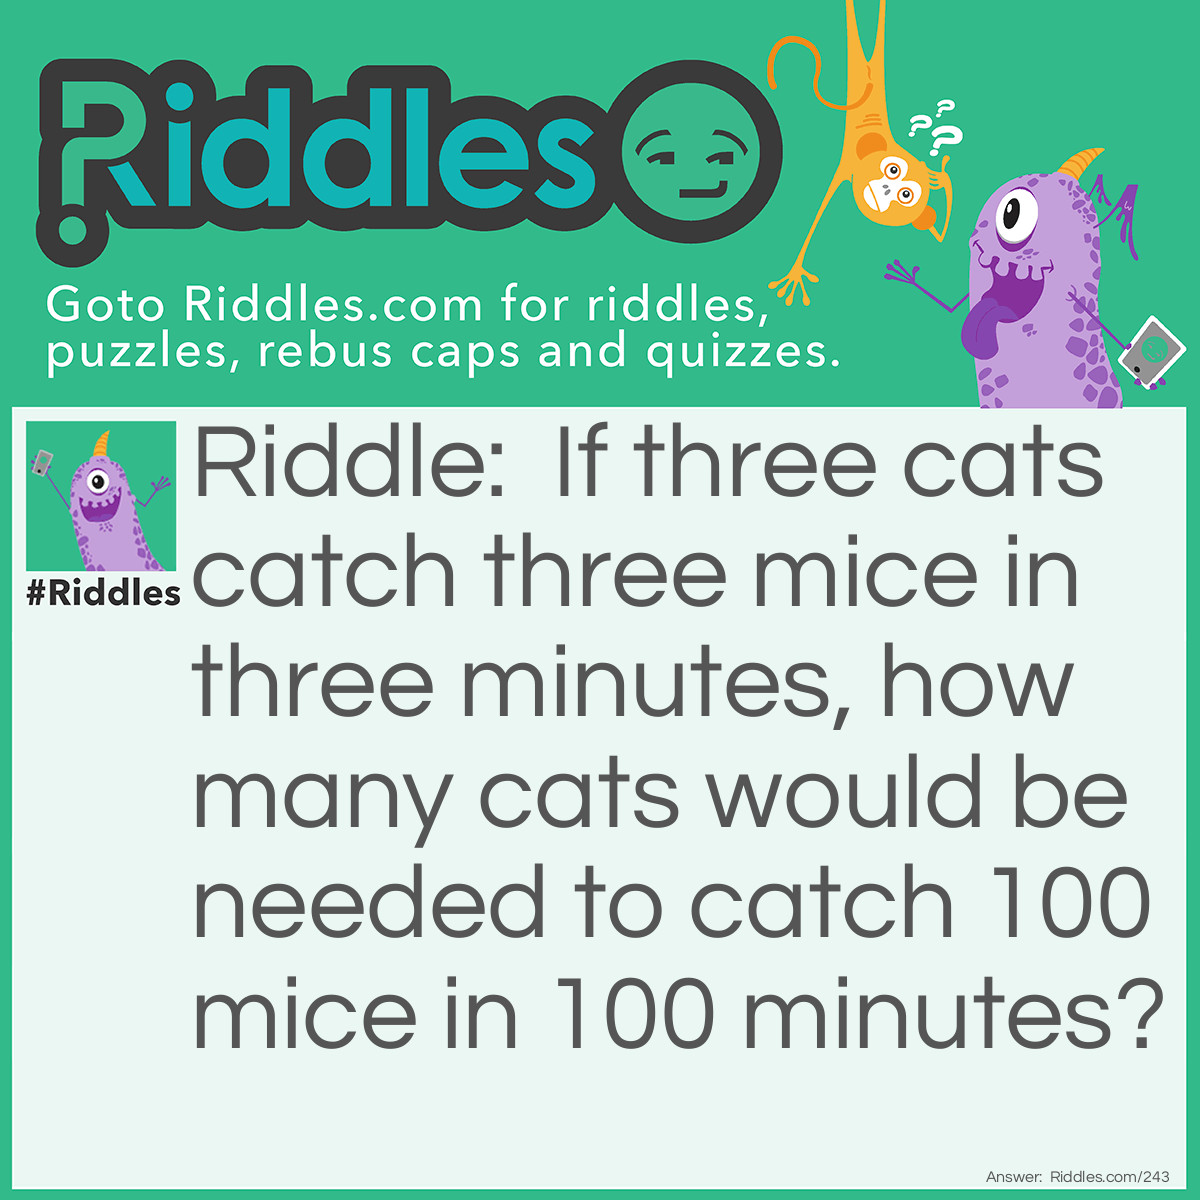 Riddle: If three cats catch three mice in three minutes, how many cats would be needed to catch 100 mice in 100 minutes? Answer: The same three cats would do. Since these three cats are averaging one mouse per minute, given 100 minutes, the cats could catch 100 mice.